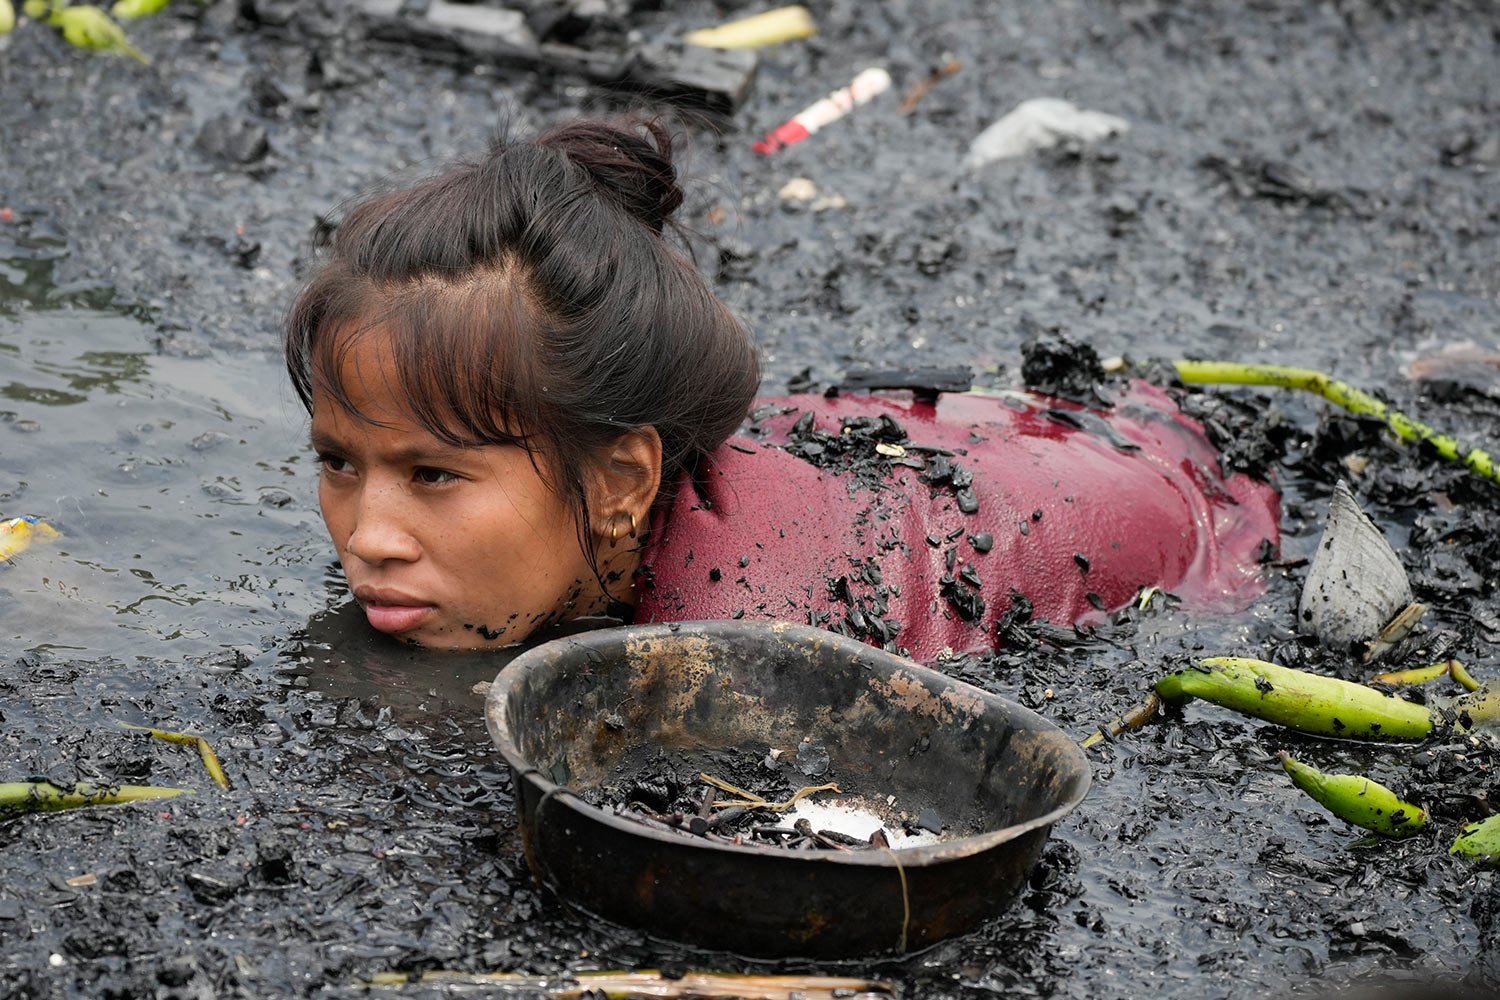  A woman searches for nails and other metal scraps from remains of burned houses that were gutted during a fire at a poor bayside village in the district of Tondo, Manila, Philippines on Friday, May 20, 2022.  (AP Photo/Aaron Favila) 